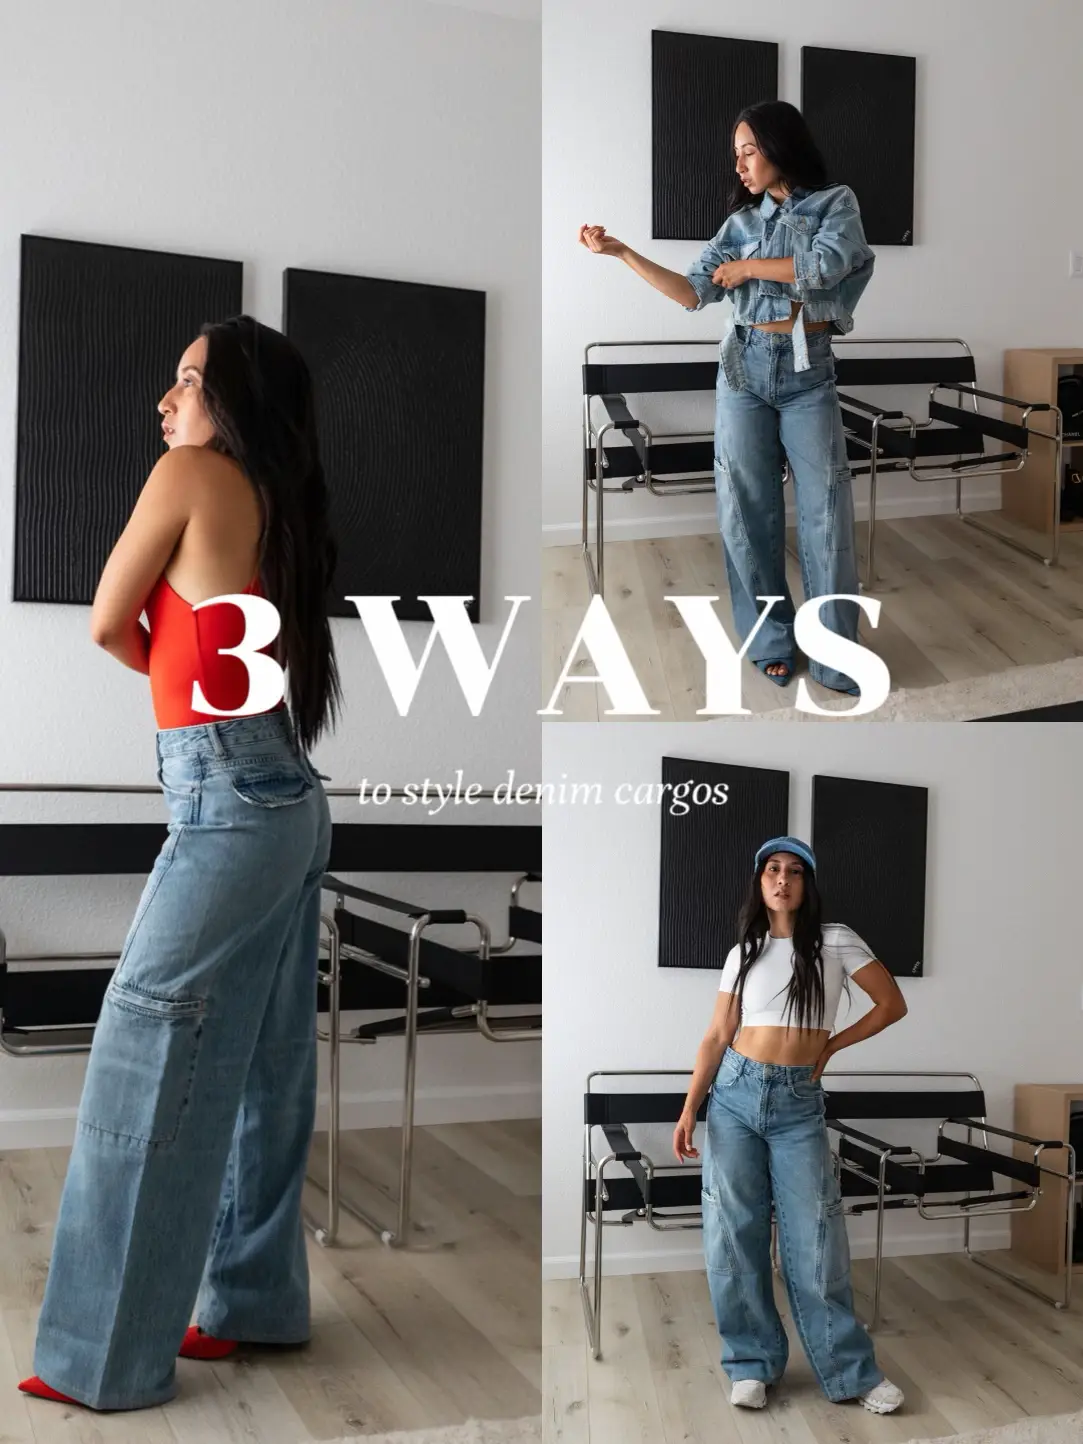 Grey Pants 11 Ways🤌🏻✨ what should I do next? #pants #styling